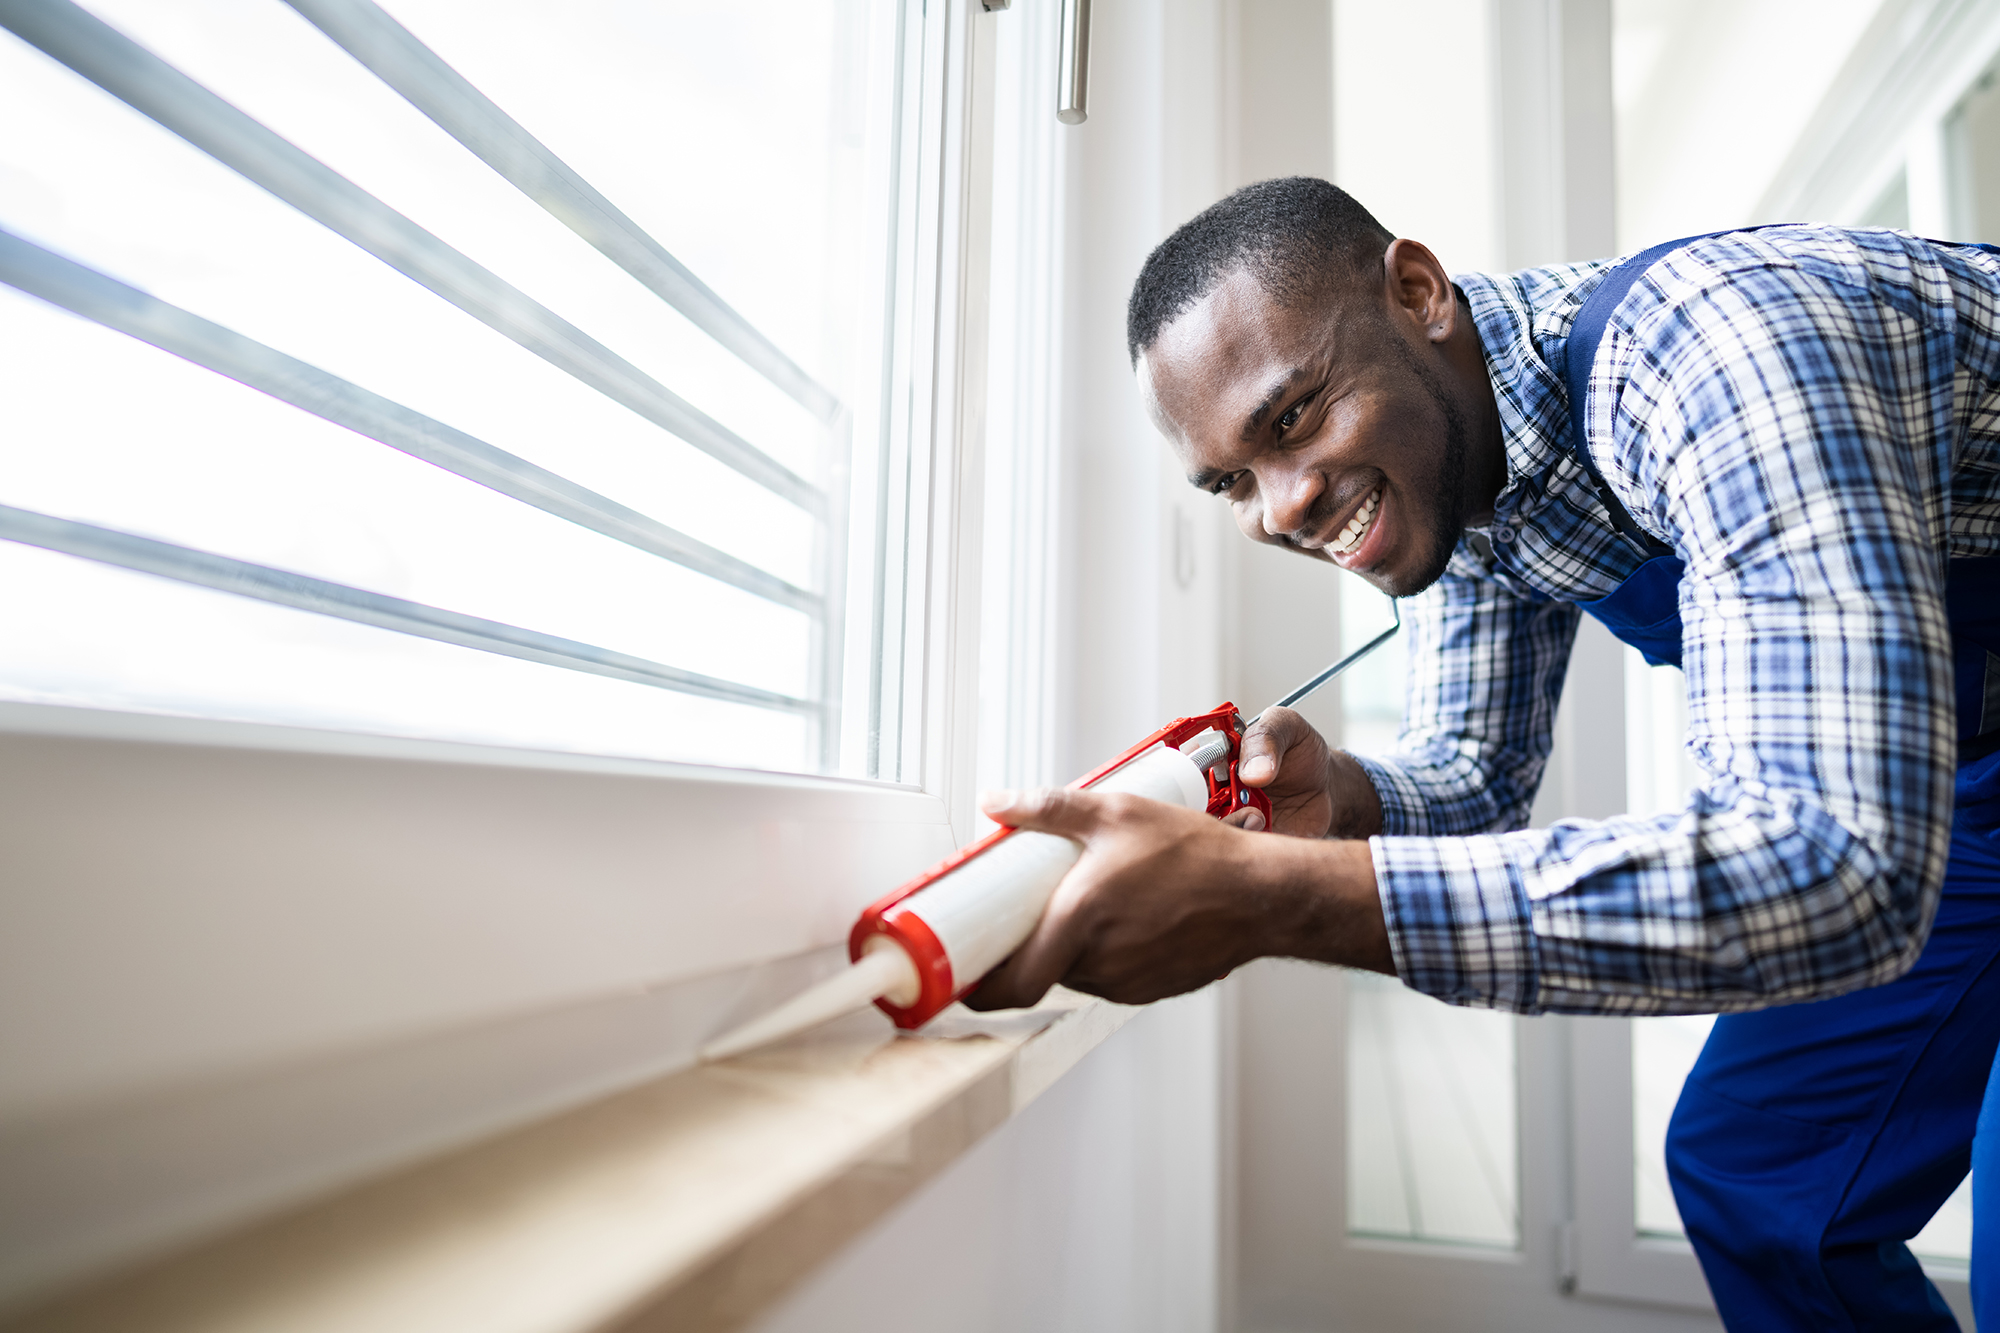 Winterizing doors and windows can reduce energy costs and keep you warmer. In this image, a man is caulking a window frame.